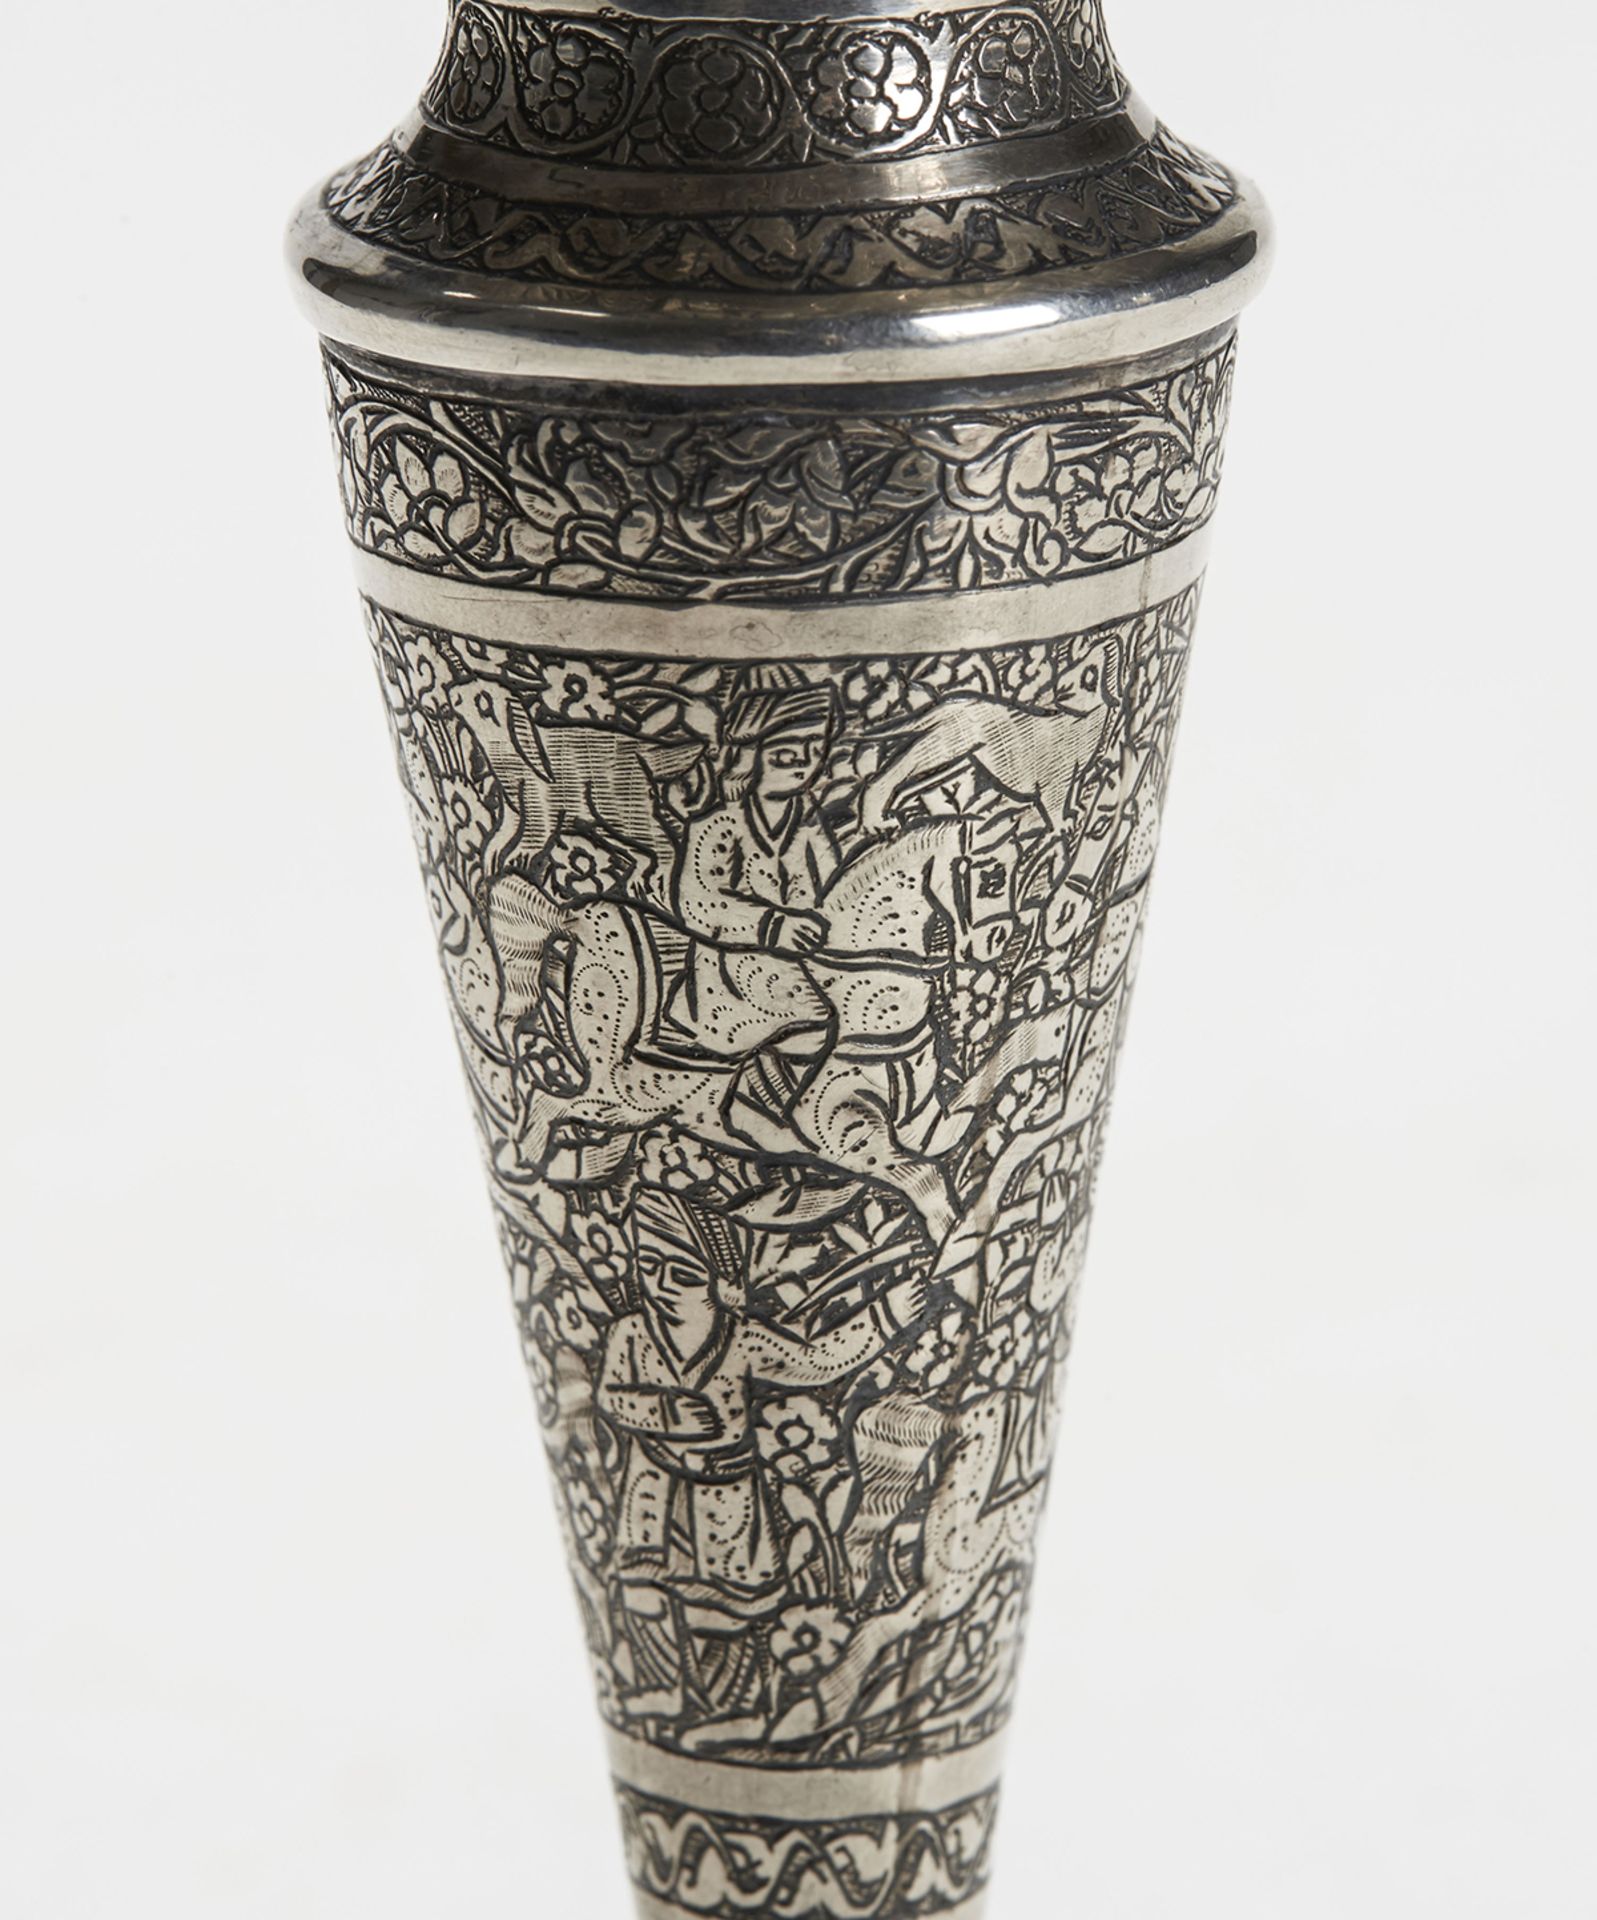 Antique Indian/Asian Silver Figural Vase 19Th C. - Image 5 of 9